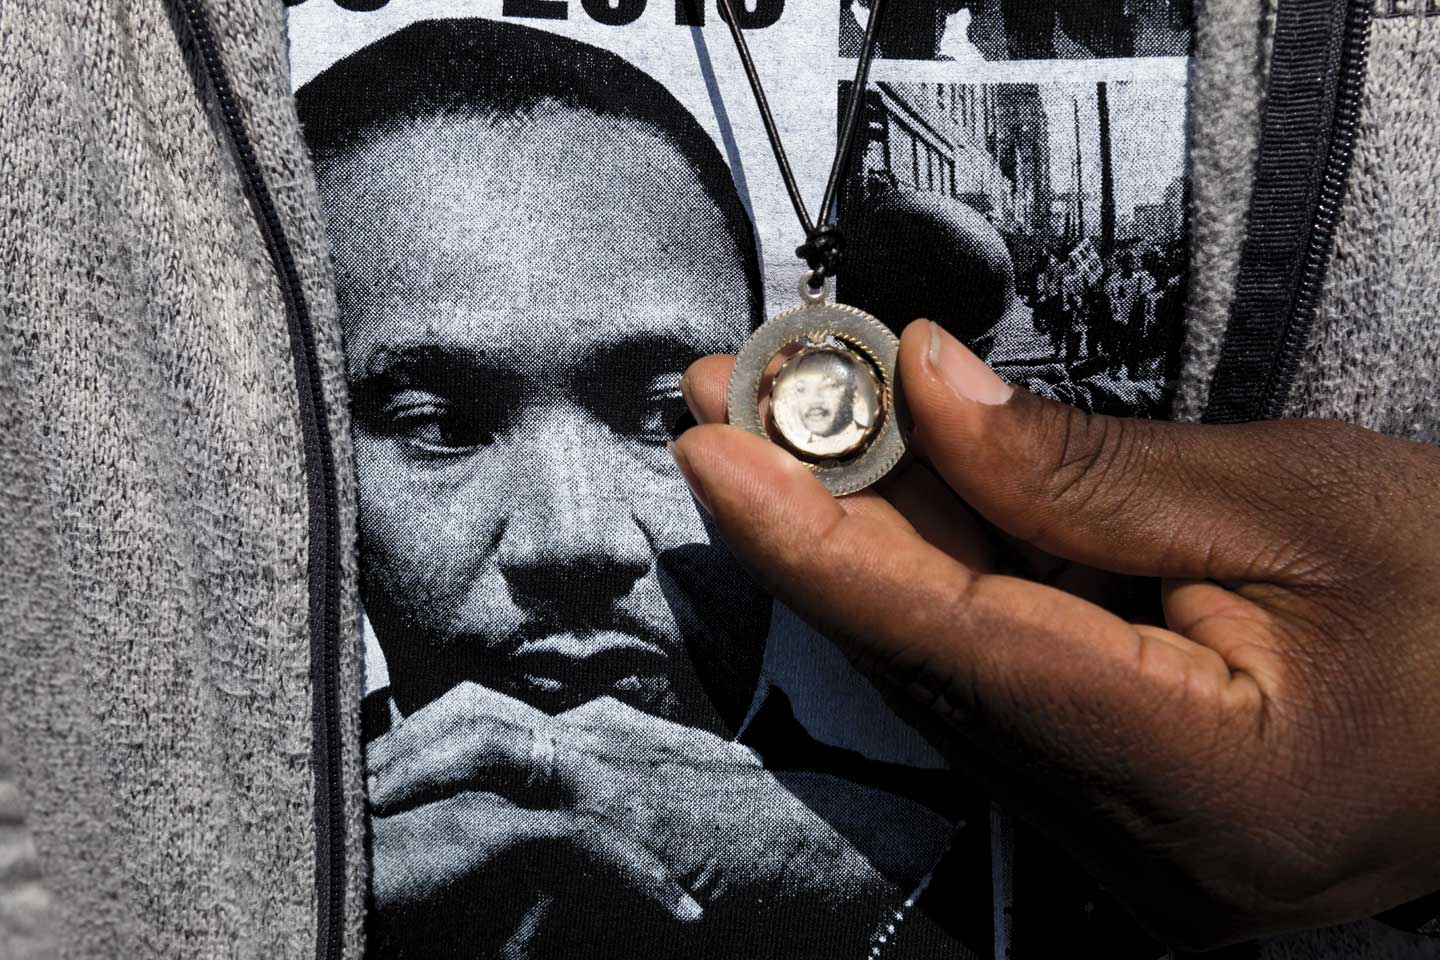 Image of Dr. Martin Luther King, Jr. on a tshirt